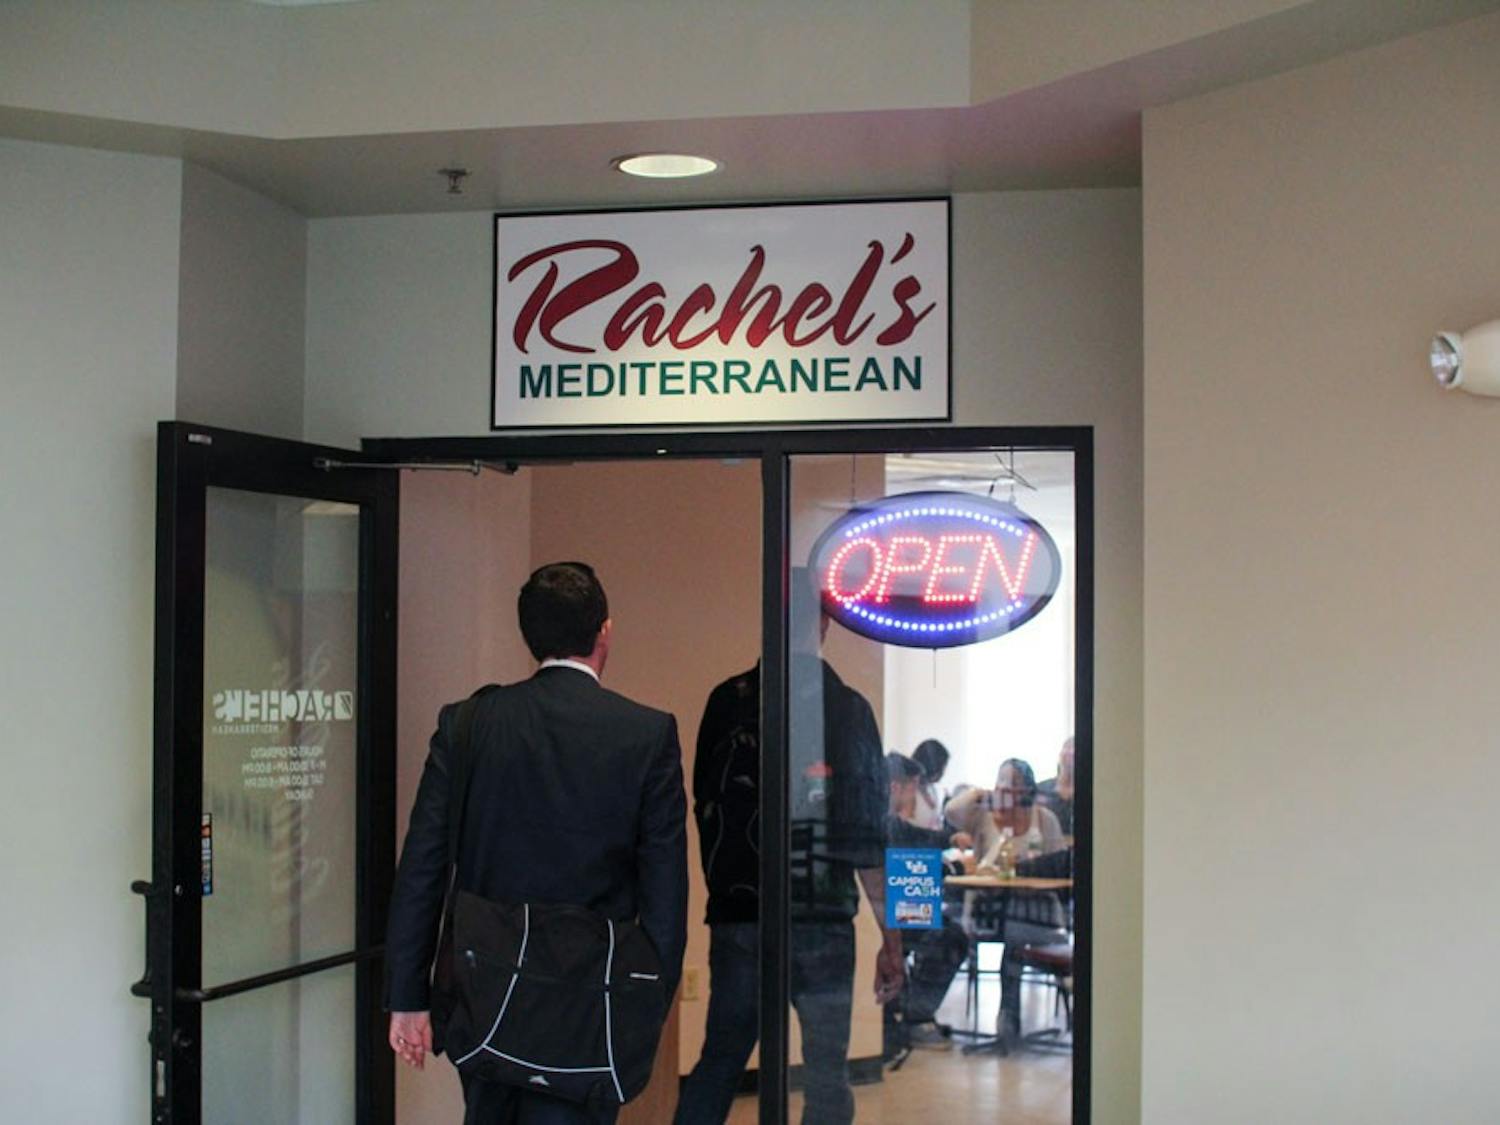 Rachel’s Mediterranean in The Commons&nbsp;has tried&nbsp;to step away from Styrofoam by adding&nbsp;recyclable plates and&nbsp;looking&nbsp;into paper products.